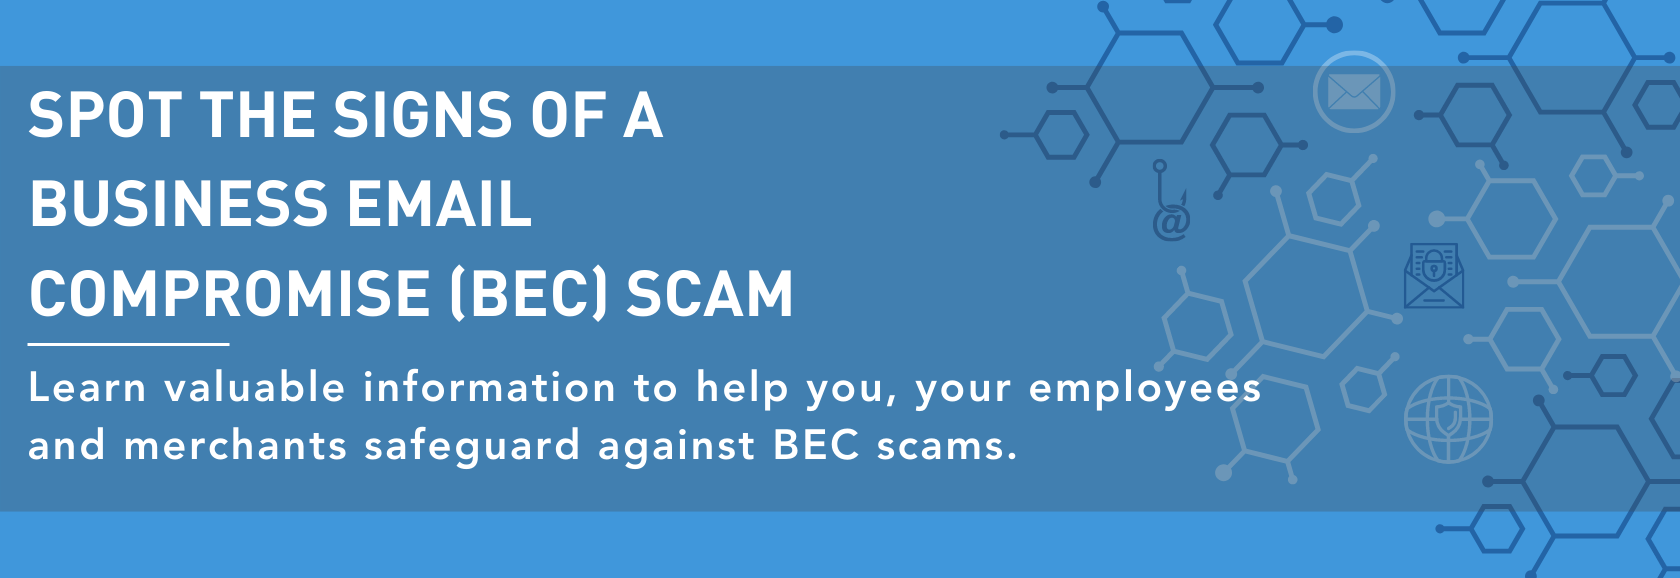 Spot the signs of a Business Email Compromise scam